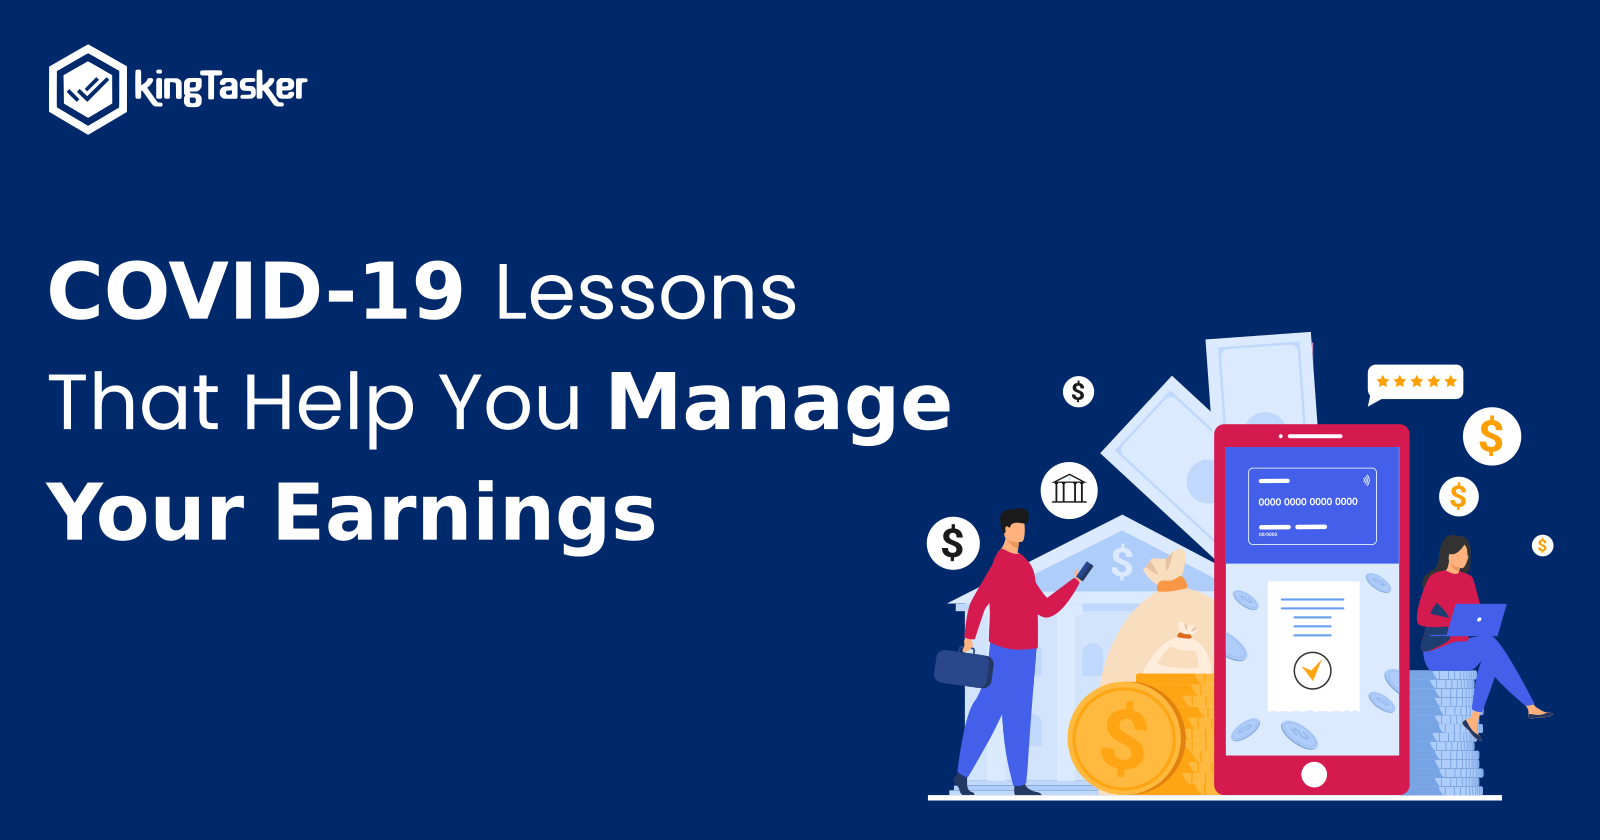 COVID-19 Lessons That Help You Manage Your Earnings